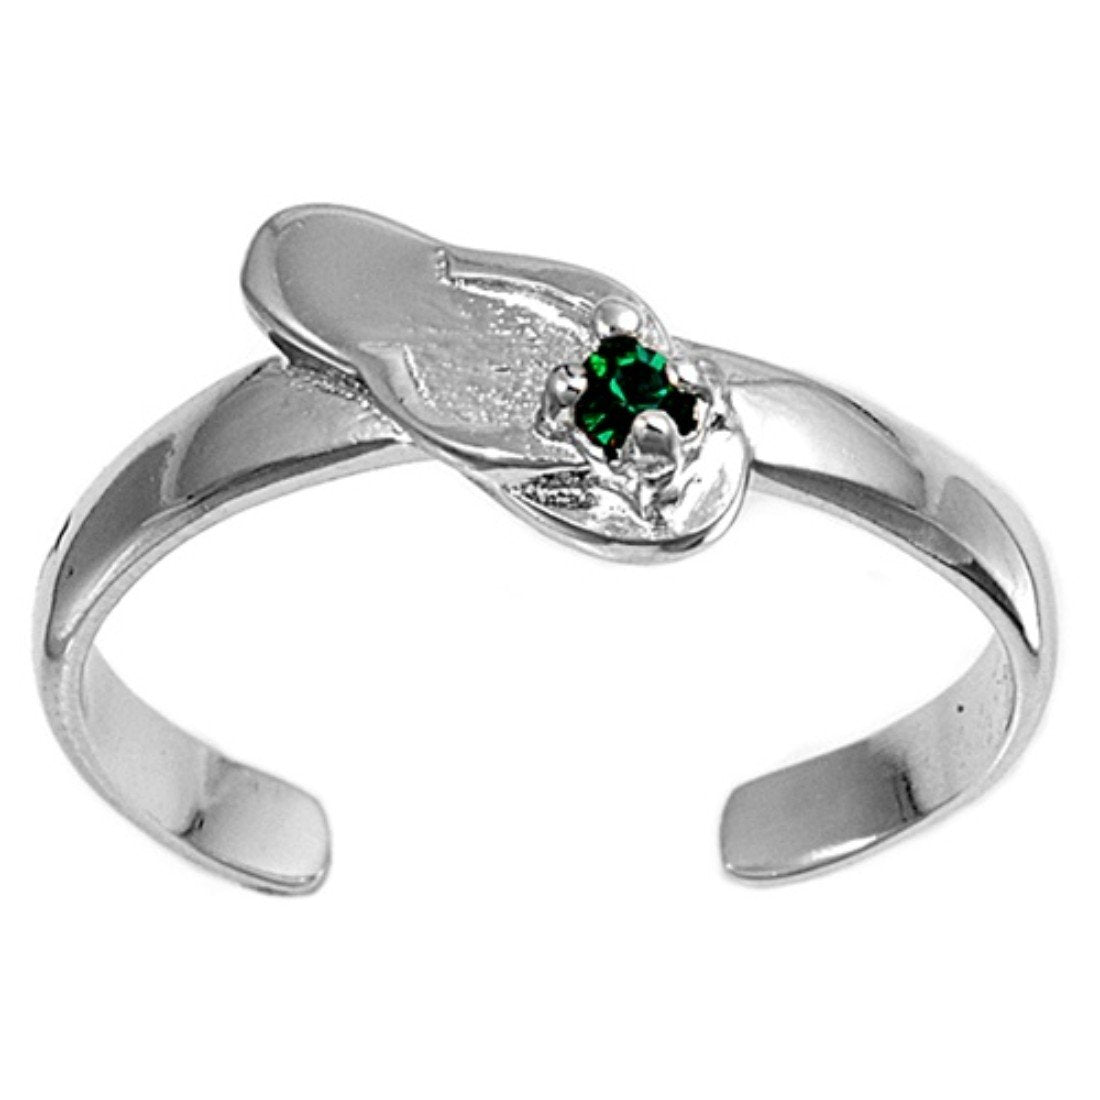 Slipper Toe Ring Simulated Green Emerald CZ Adjustable 925 Sterling Silver (5mm)